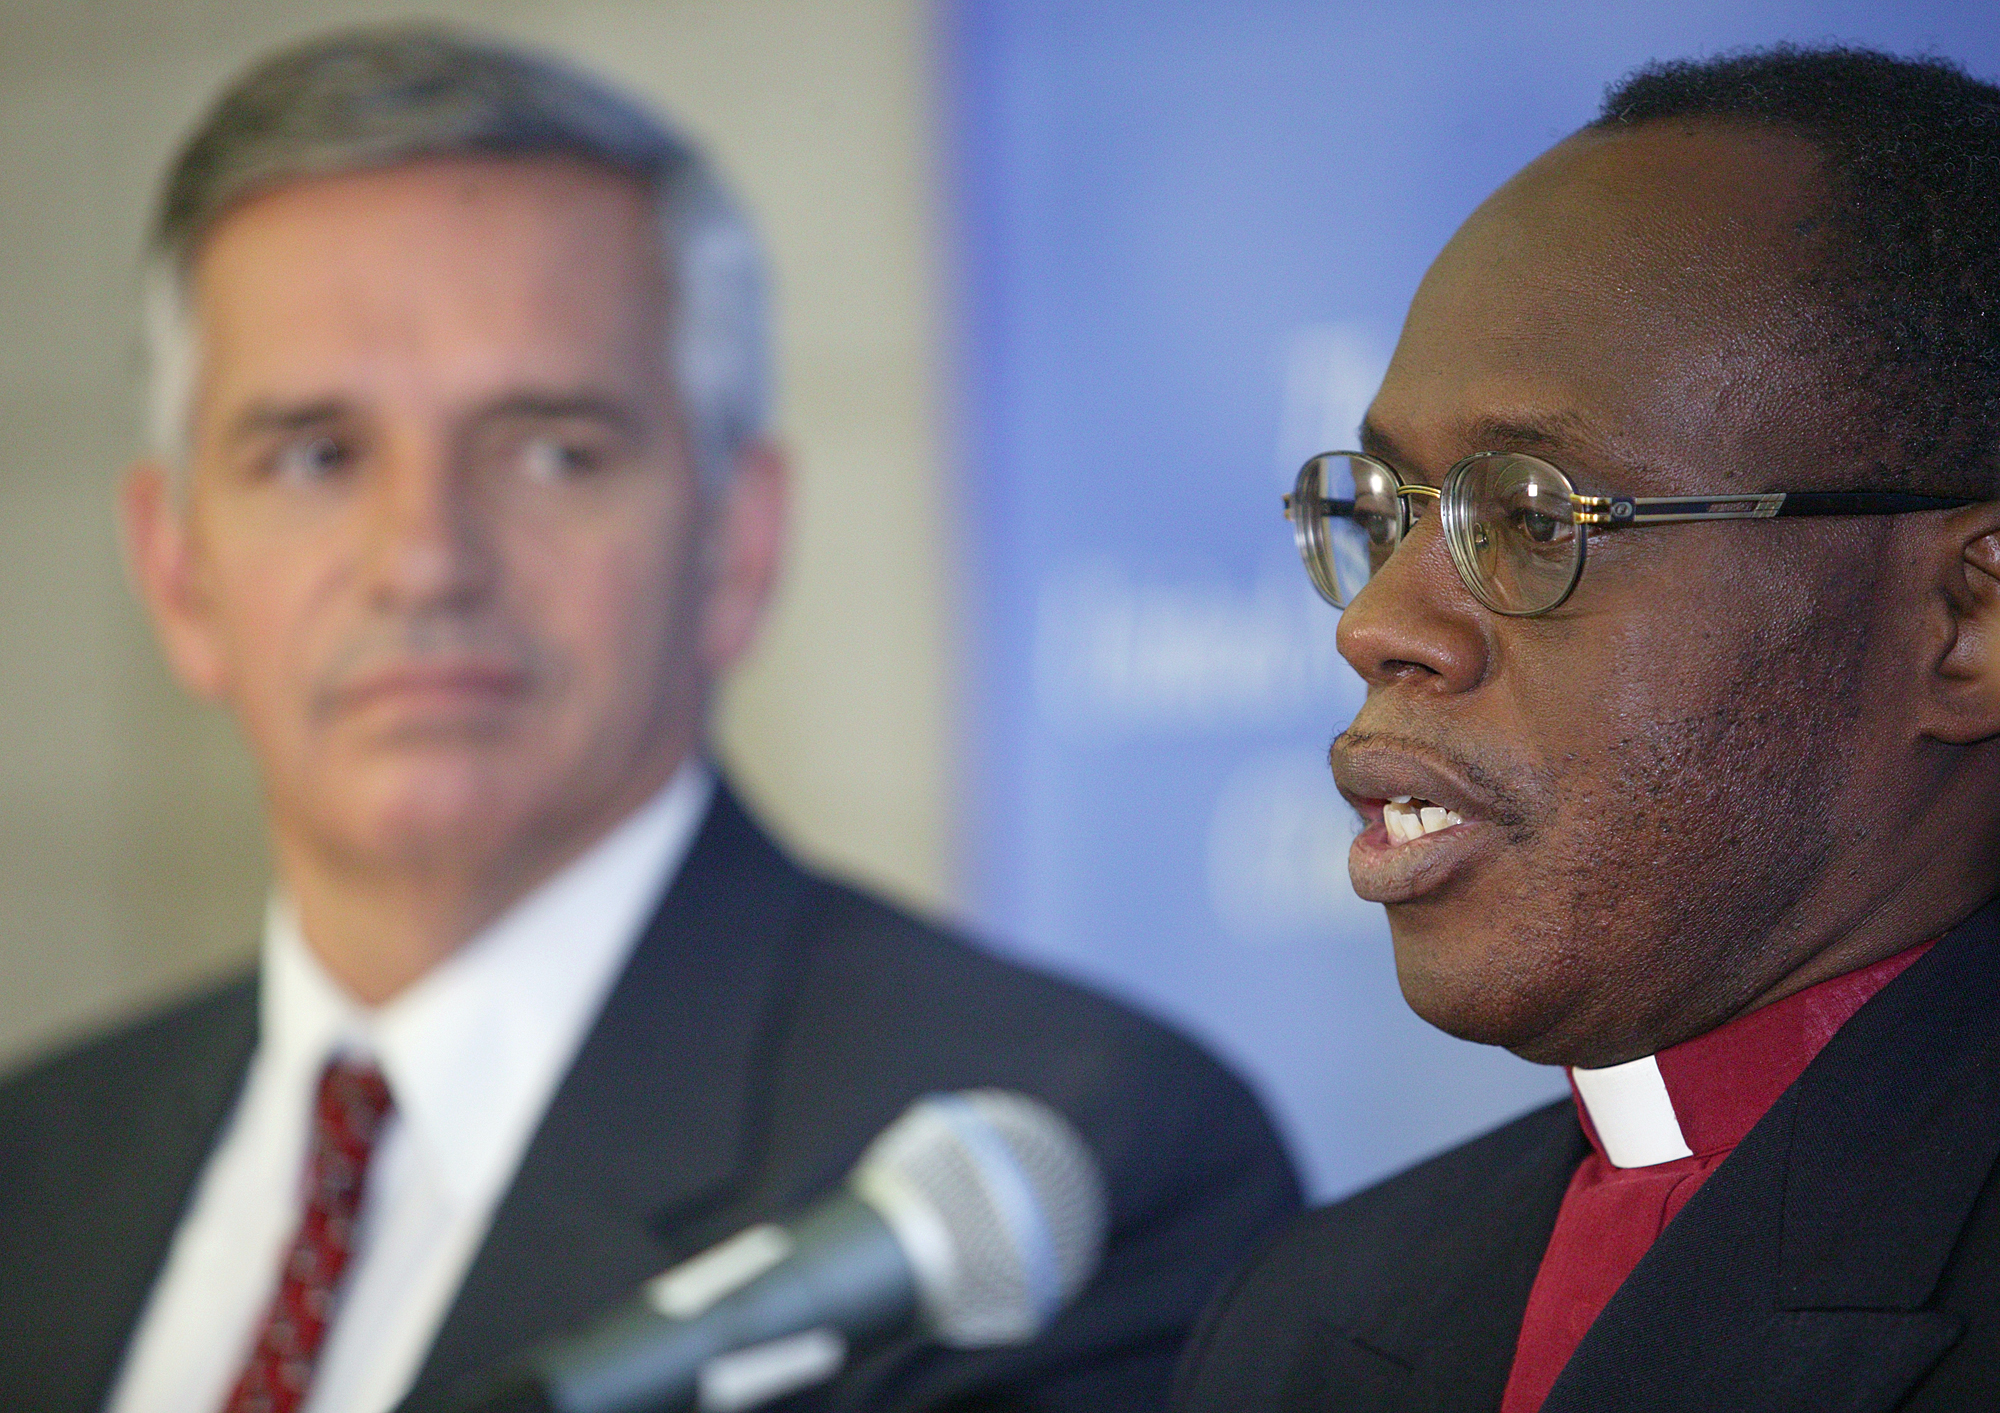 Rev. Benjamin Boni (right) and Rev. R. Randy Day announce that the million-member Protestant Methodist Church of Cote d'Ivoire is joining the United Methodist Church during a press conference at the United Methodist Church's 2004 General Conference in Pittsburgh. Boni is leader of the Cote d'Ivoire delegation to General Conference. Day is top staff executive of the United Methodist Board of Global Ministries. A UMNS photo by Mike DuBose.